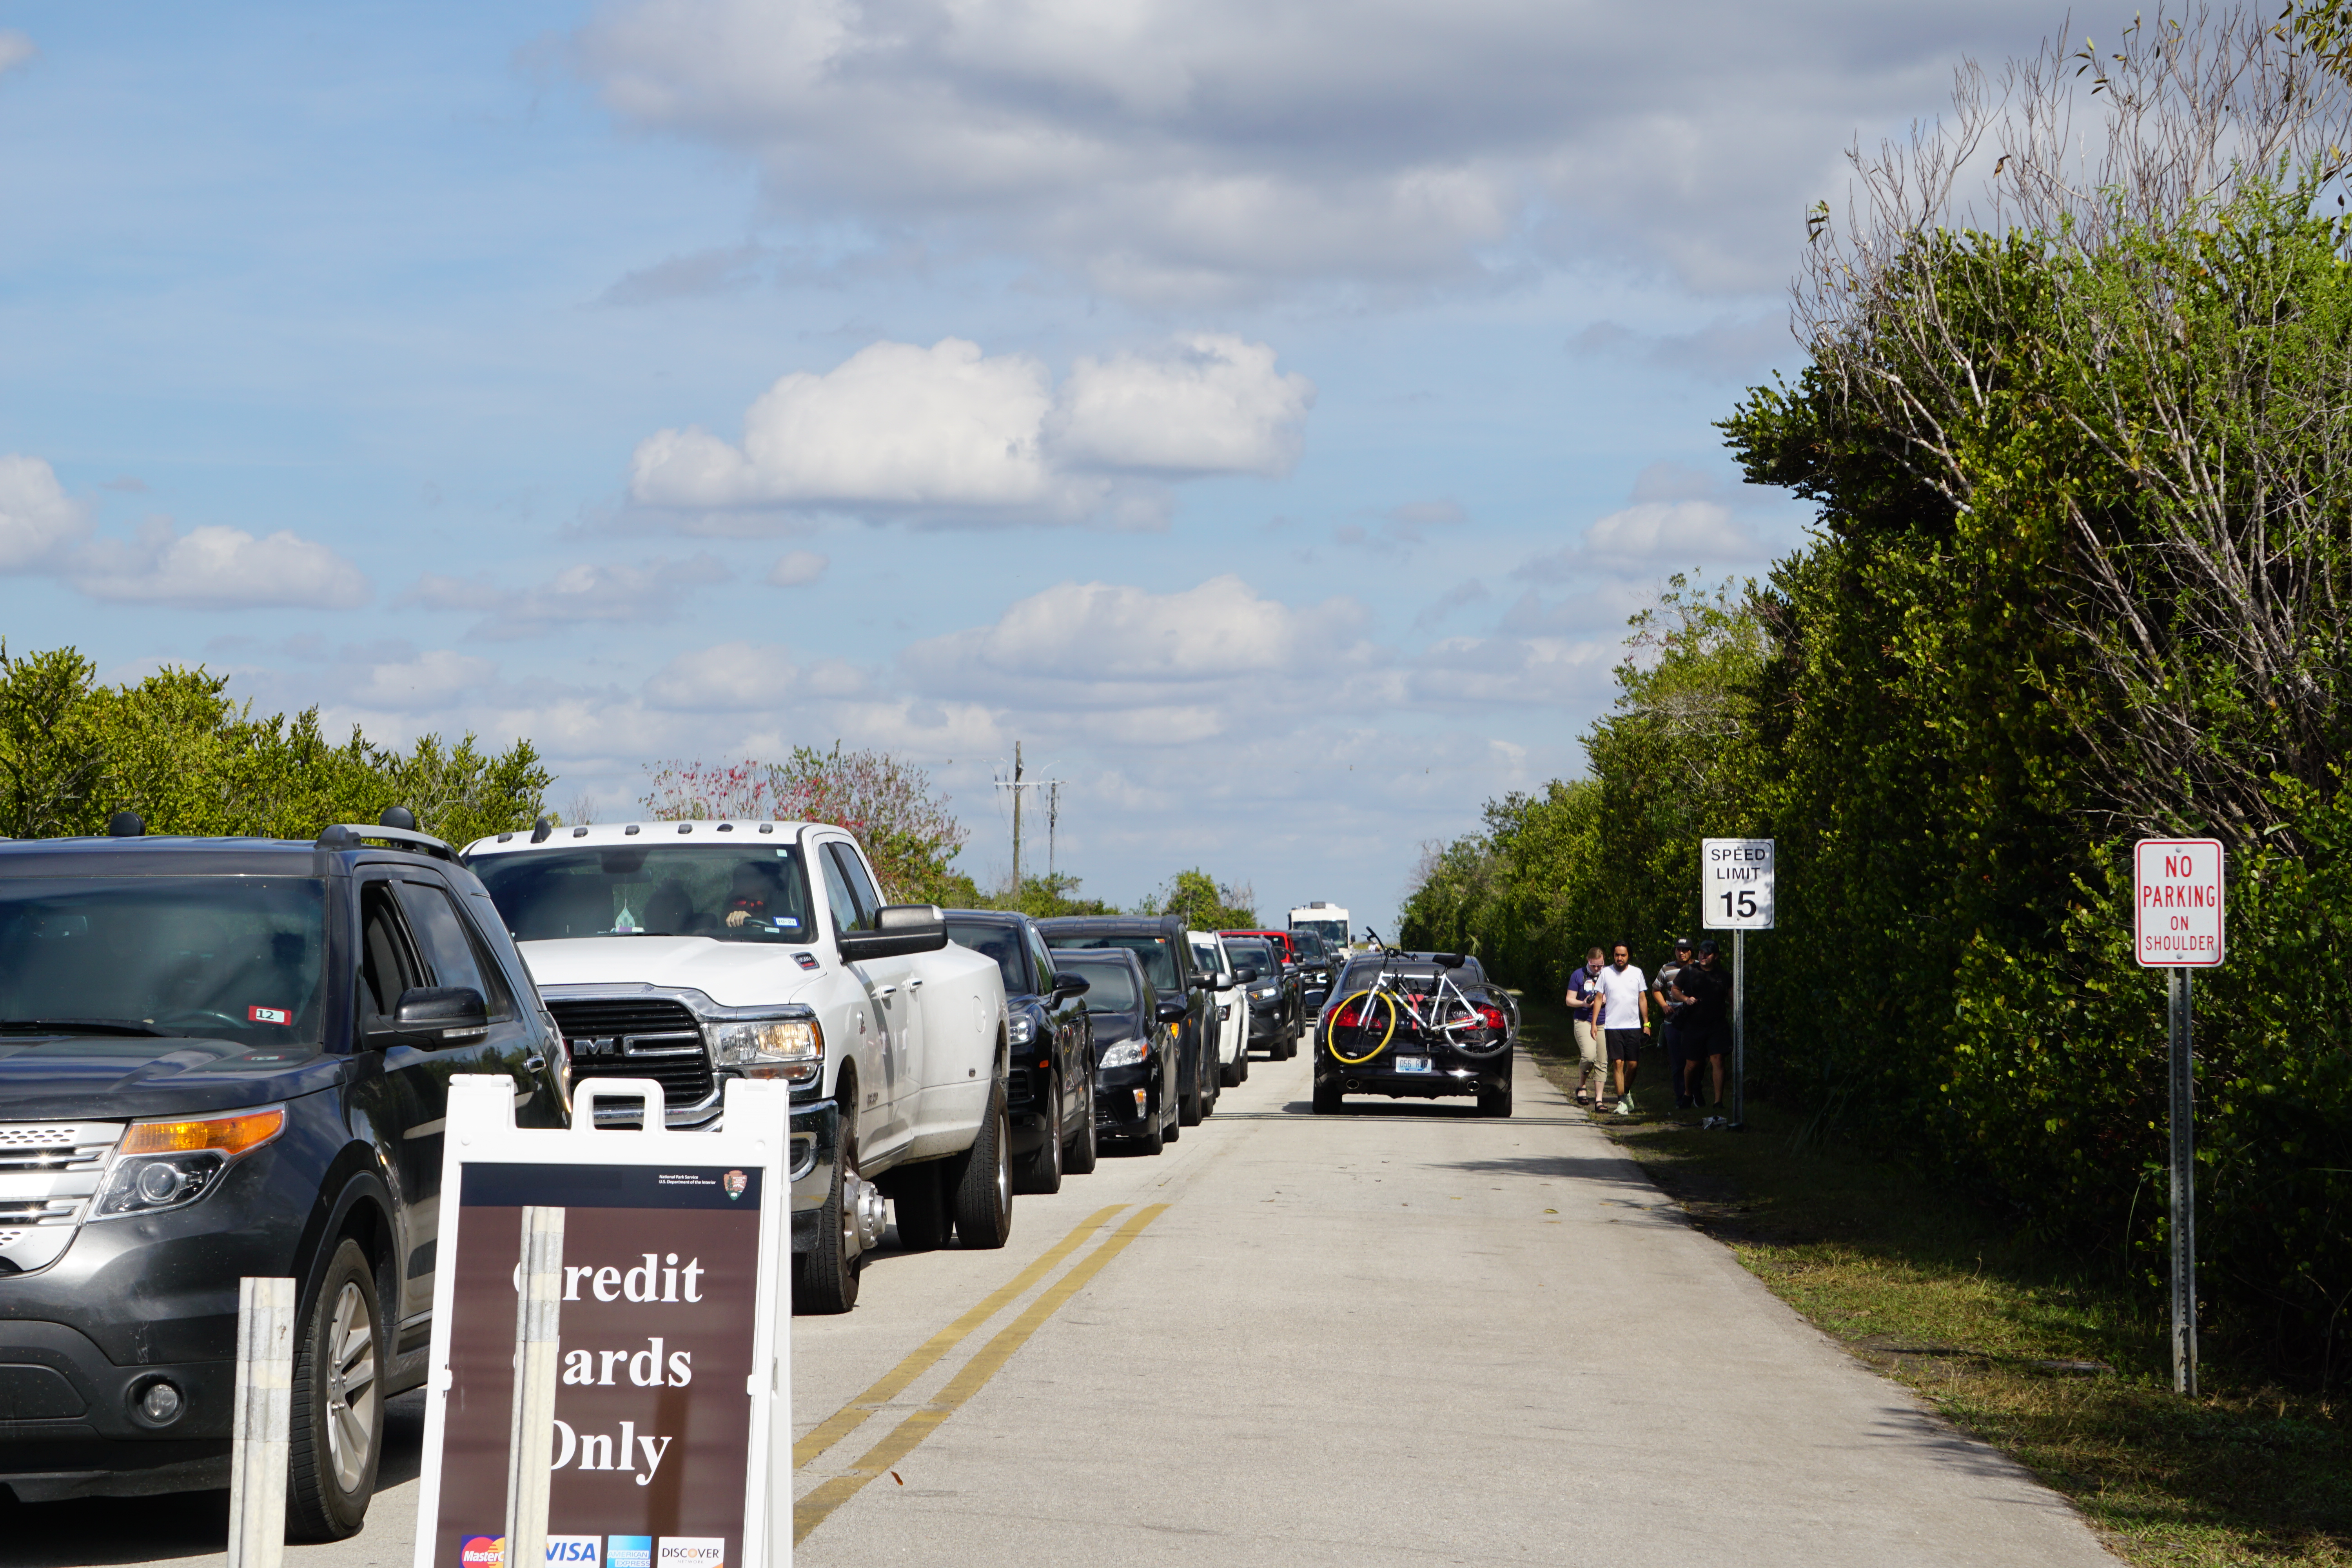 A line of vehicles facing forward in left lane while one car with a bicycle attached at the rear departs in the right lane. Visitors walk alongside the road. A sign in the foreground reads "Credit Cards only.